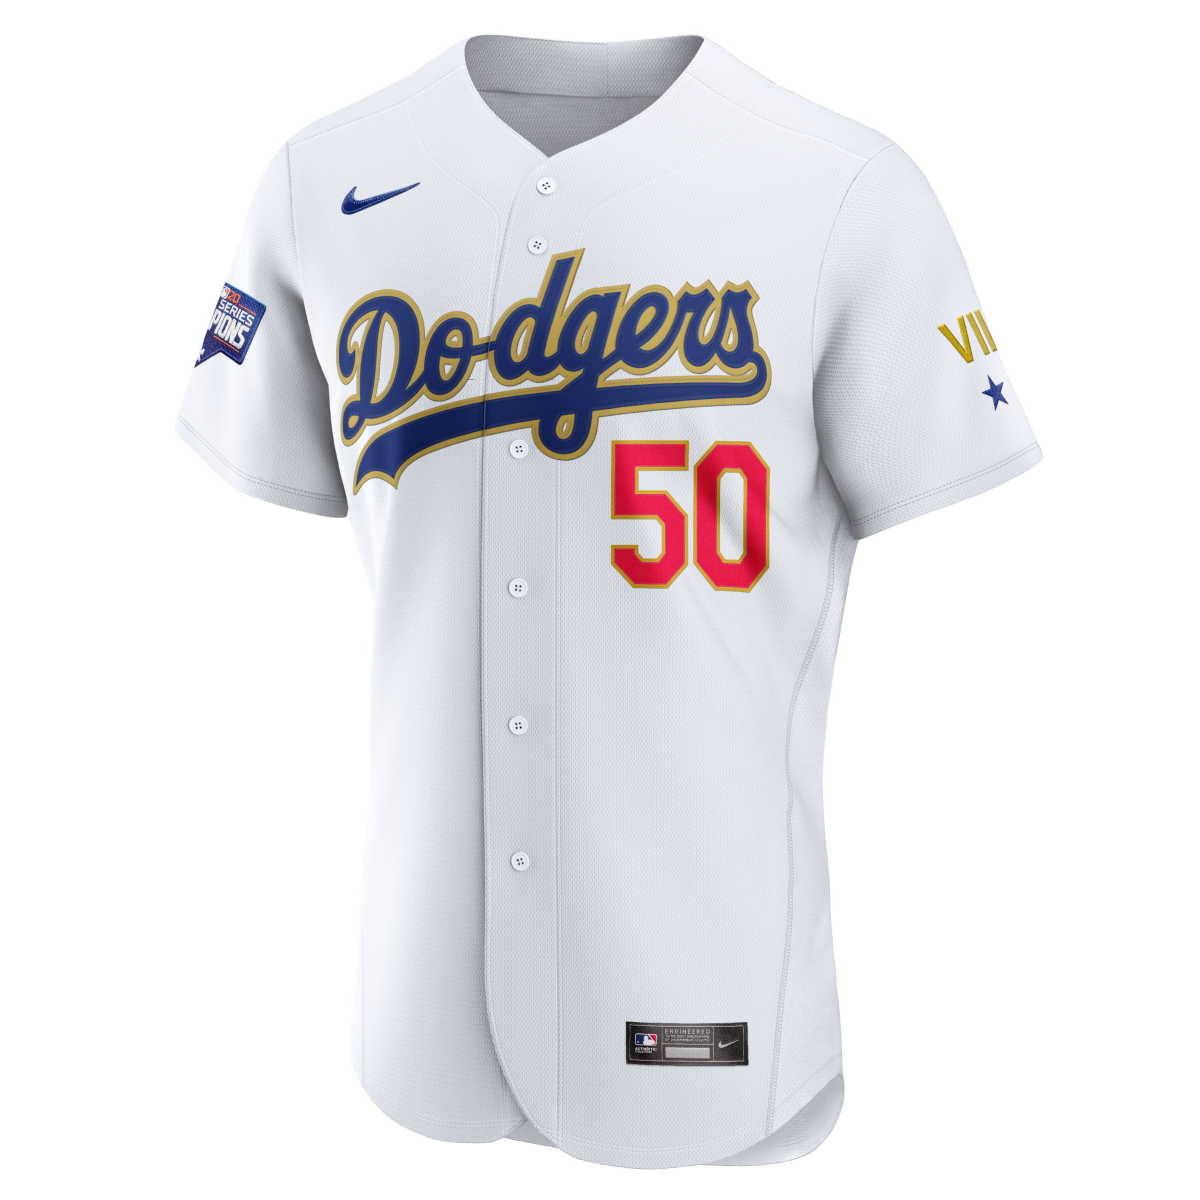 Dodgers jersey recognizing 2020 World Series title.